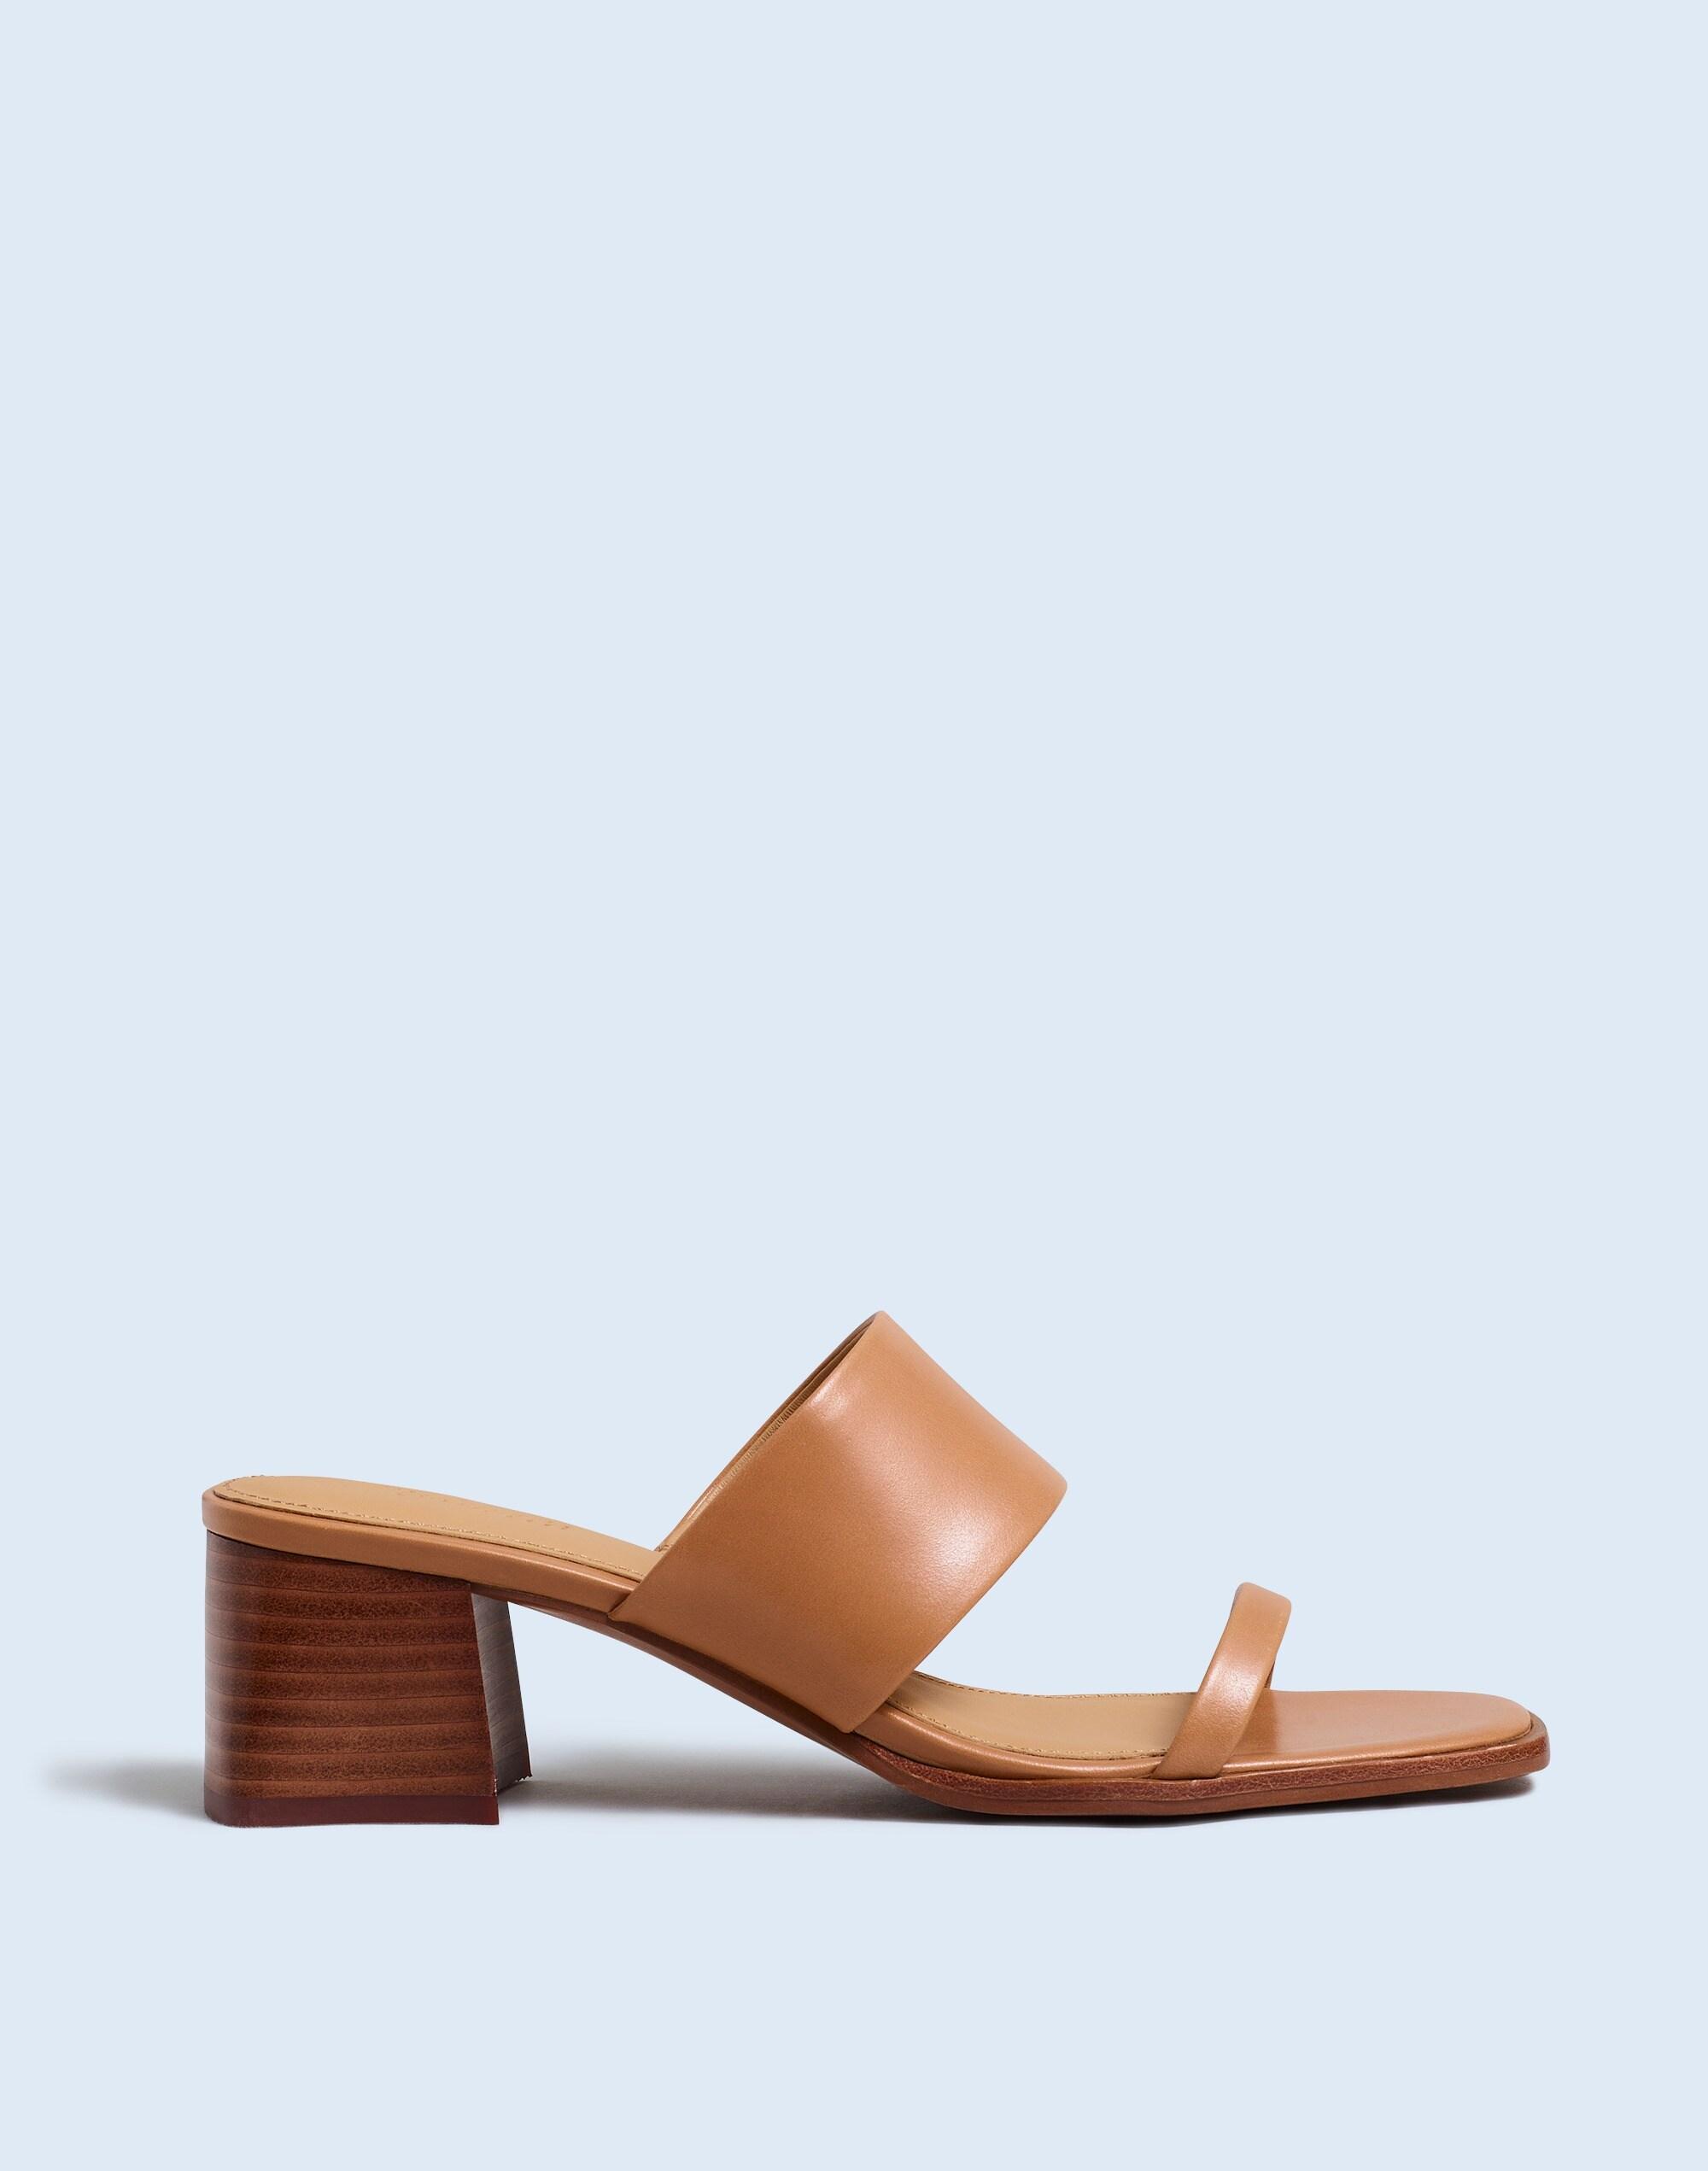 The Kaitlin Sandal in Shiny Leather Product Image